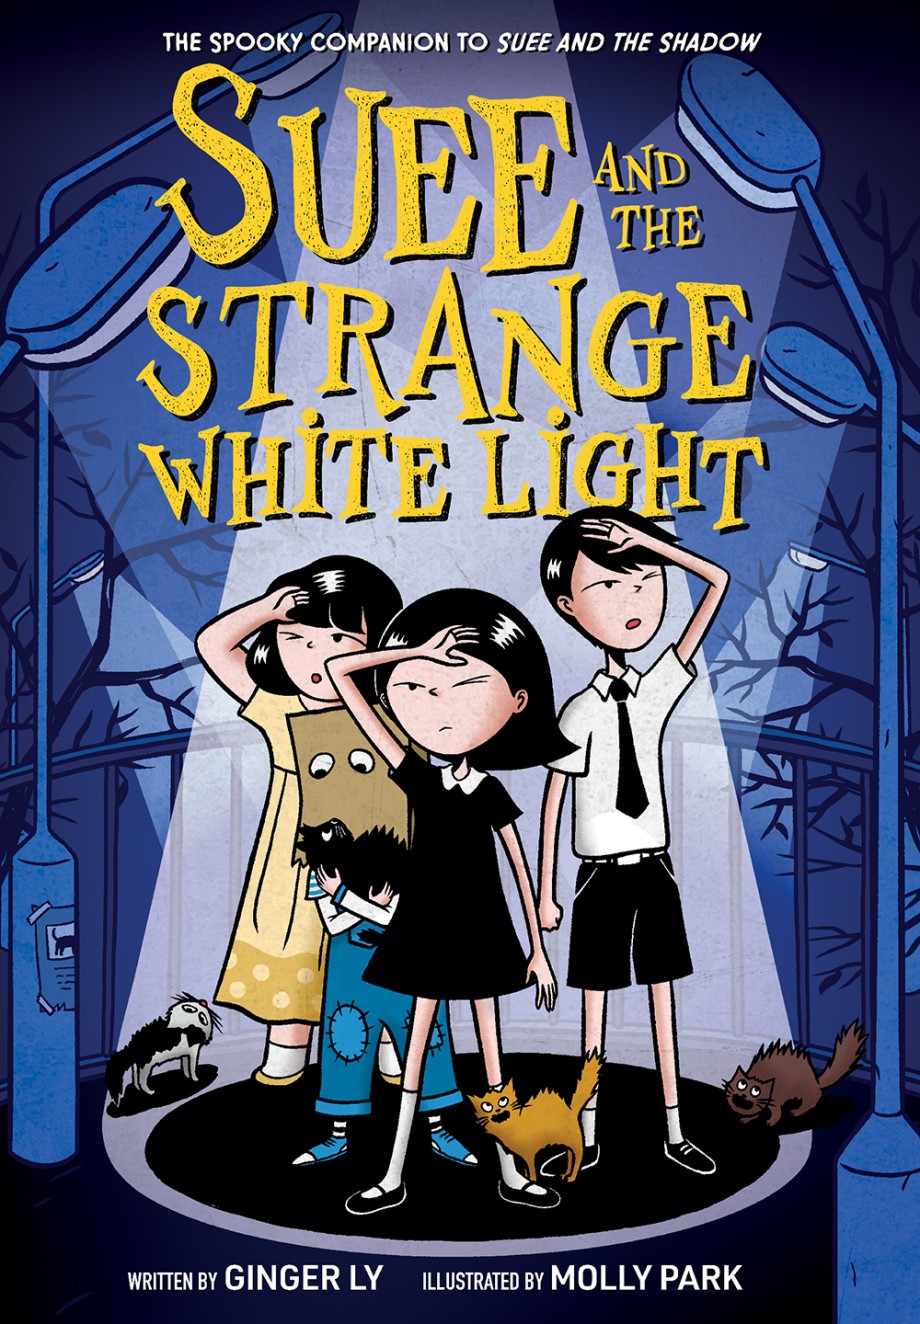 Suee and the Strange White Light (Suee and the Shadow Book #2) 